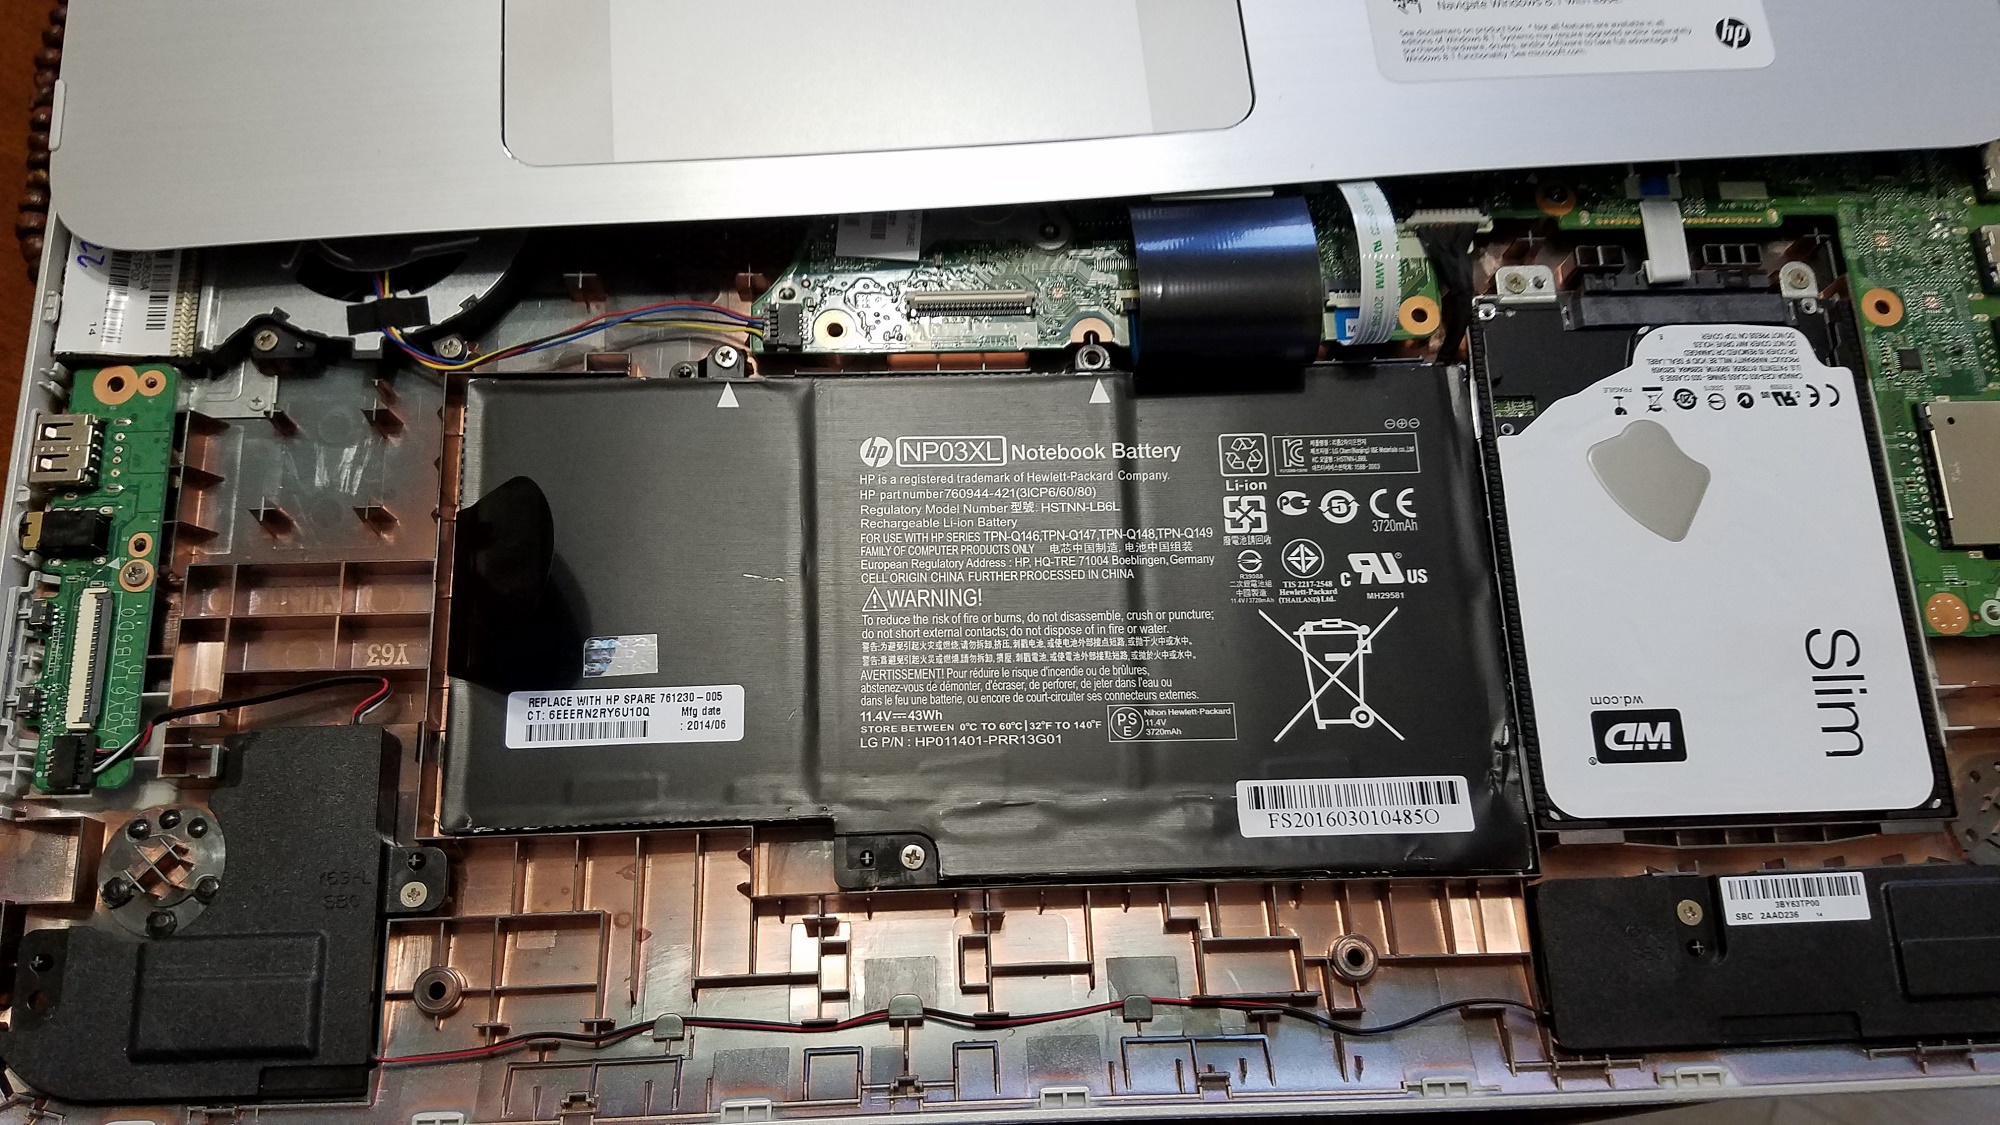 Battery replaced